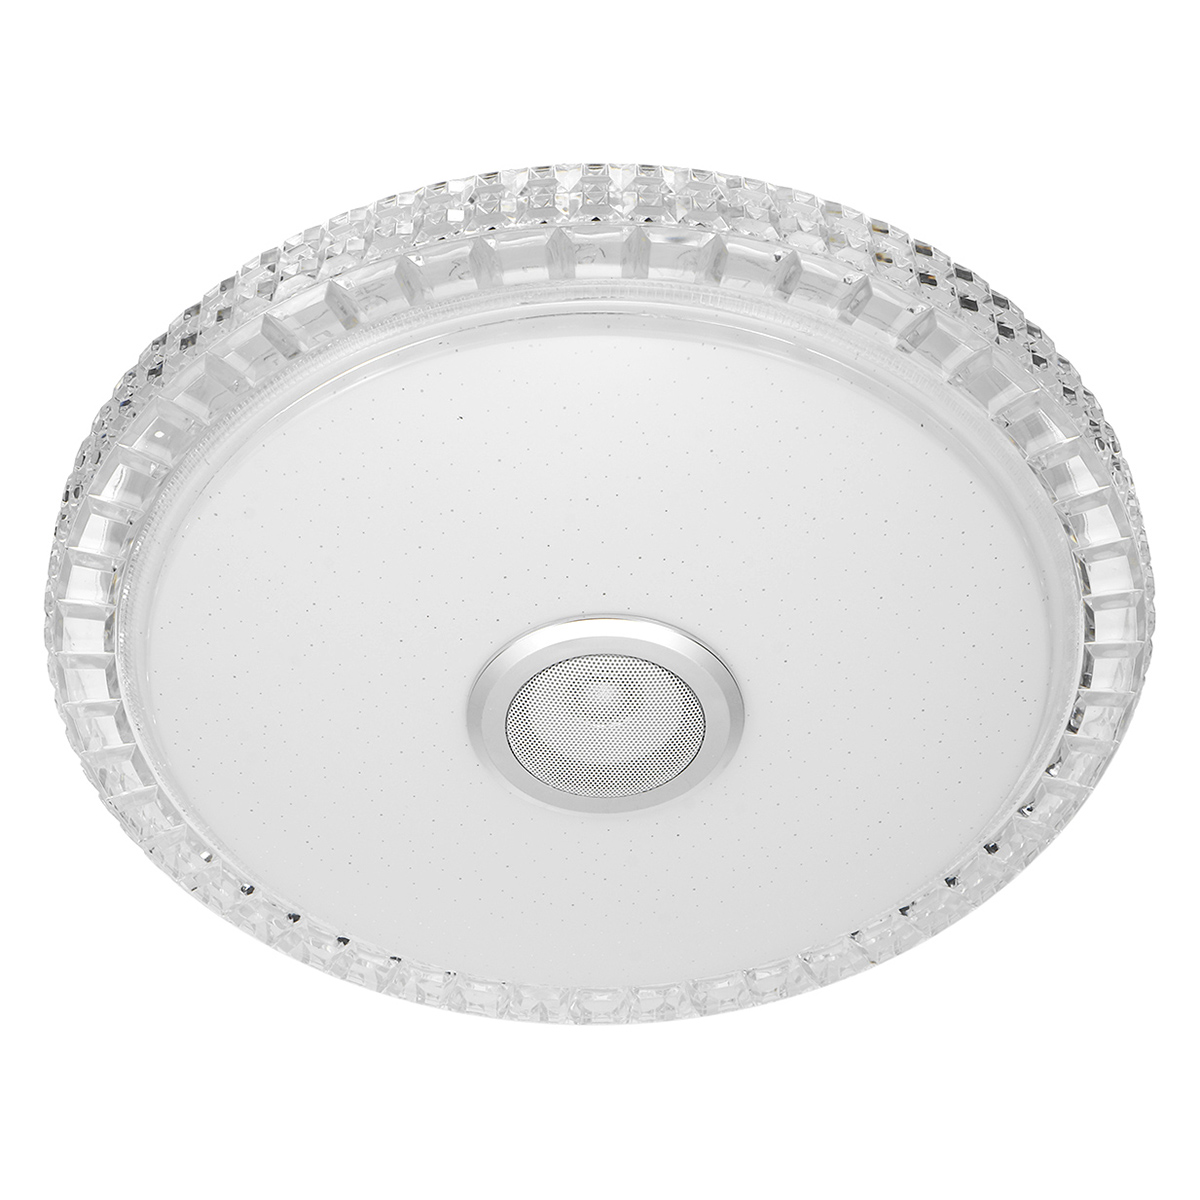 RGB-LED-Ceiling-Lights-Flush-Mount-Smart-bluetooth-Lamp-Remote-Control-Dimmable-1843110-10